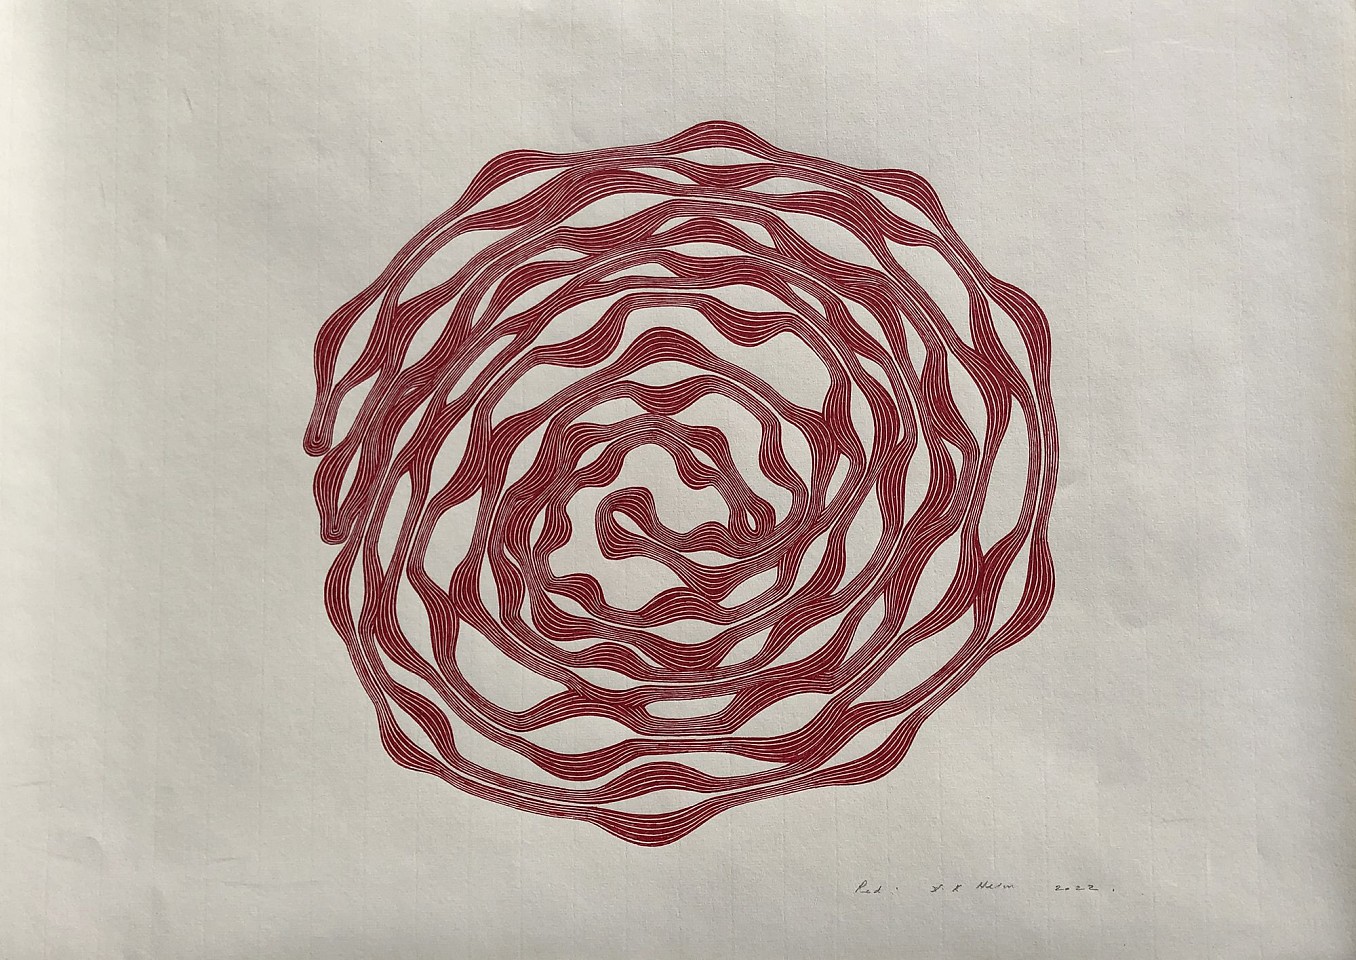 Stewart Helm, Red Spool, 2022
Red ink on paper, 19"x 27.5"
SH-649
Price Upon Request